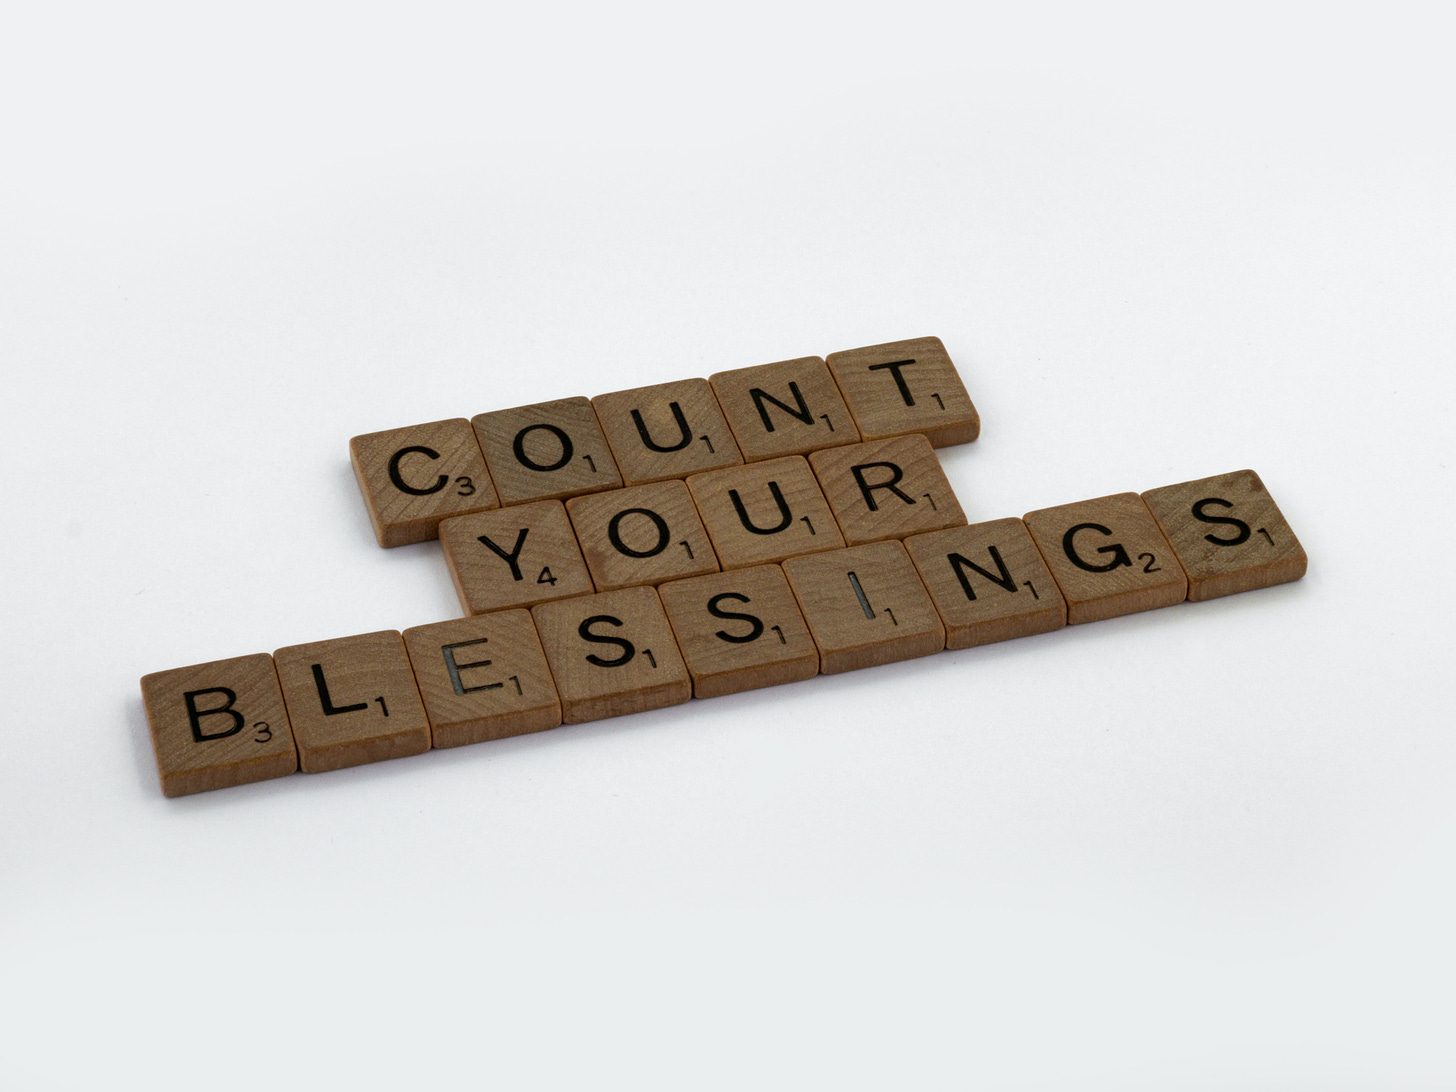 Scrabble tiles spelling the phrase "Count Your Blessings"